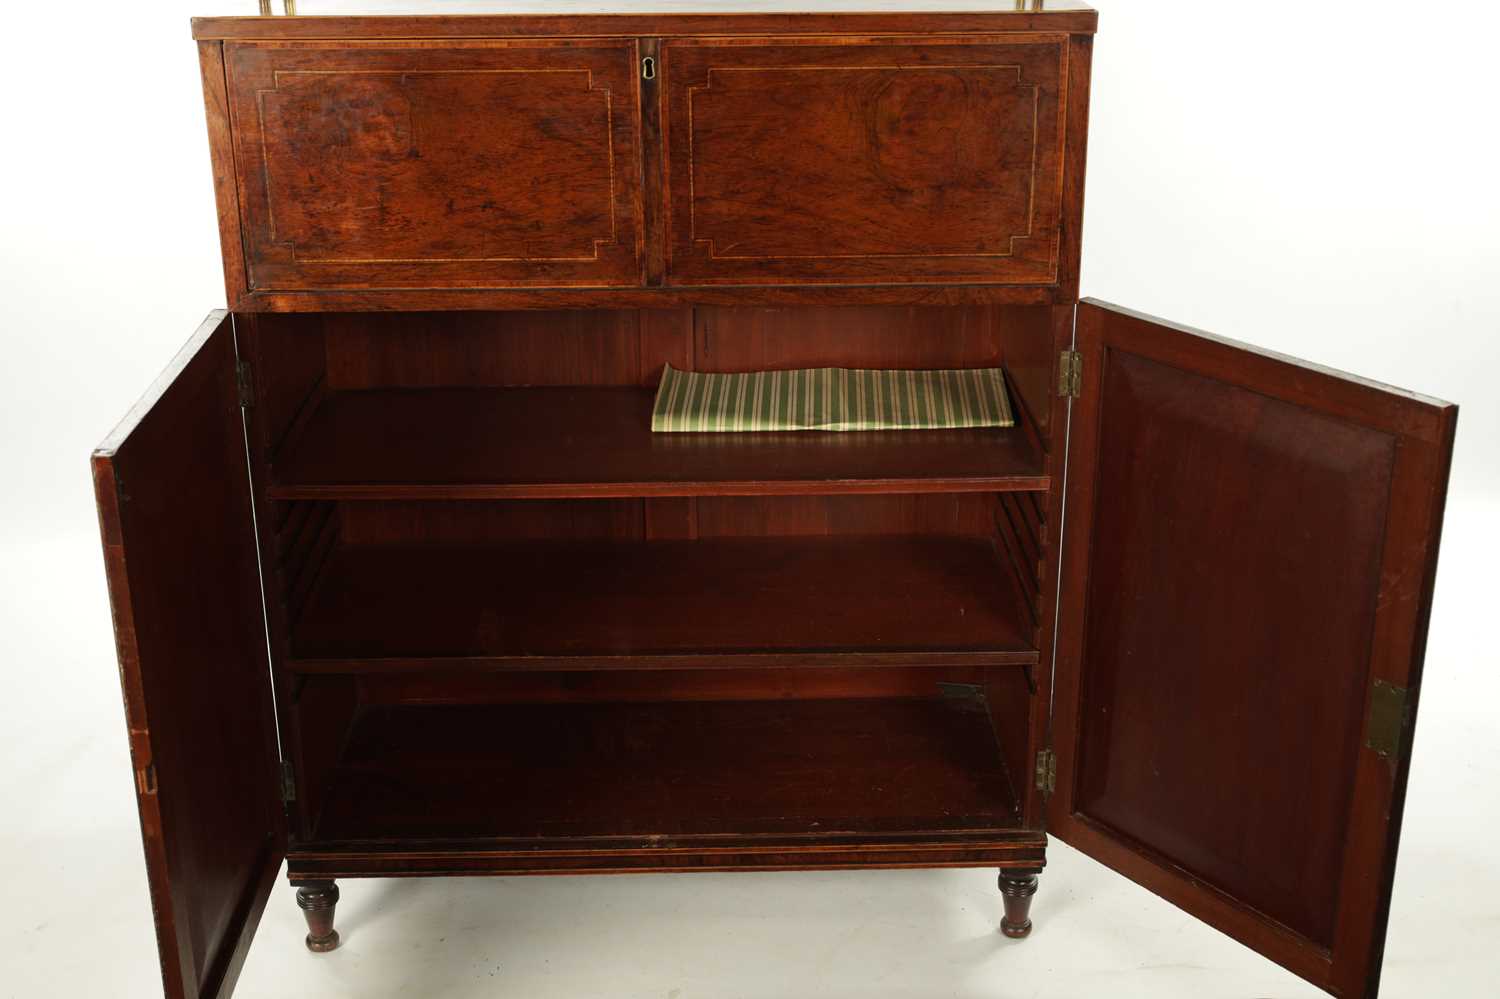 A REGENCY ROSEWOOD AND KING WOOD CROSS-BANDED SECRETAIRE SIDE CABINET - Image 5 of 17